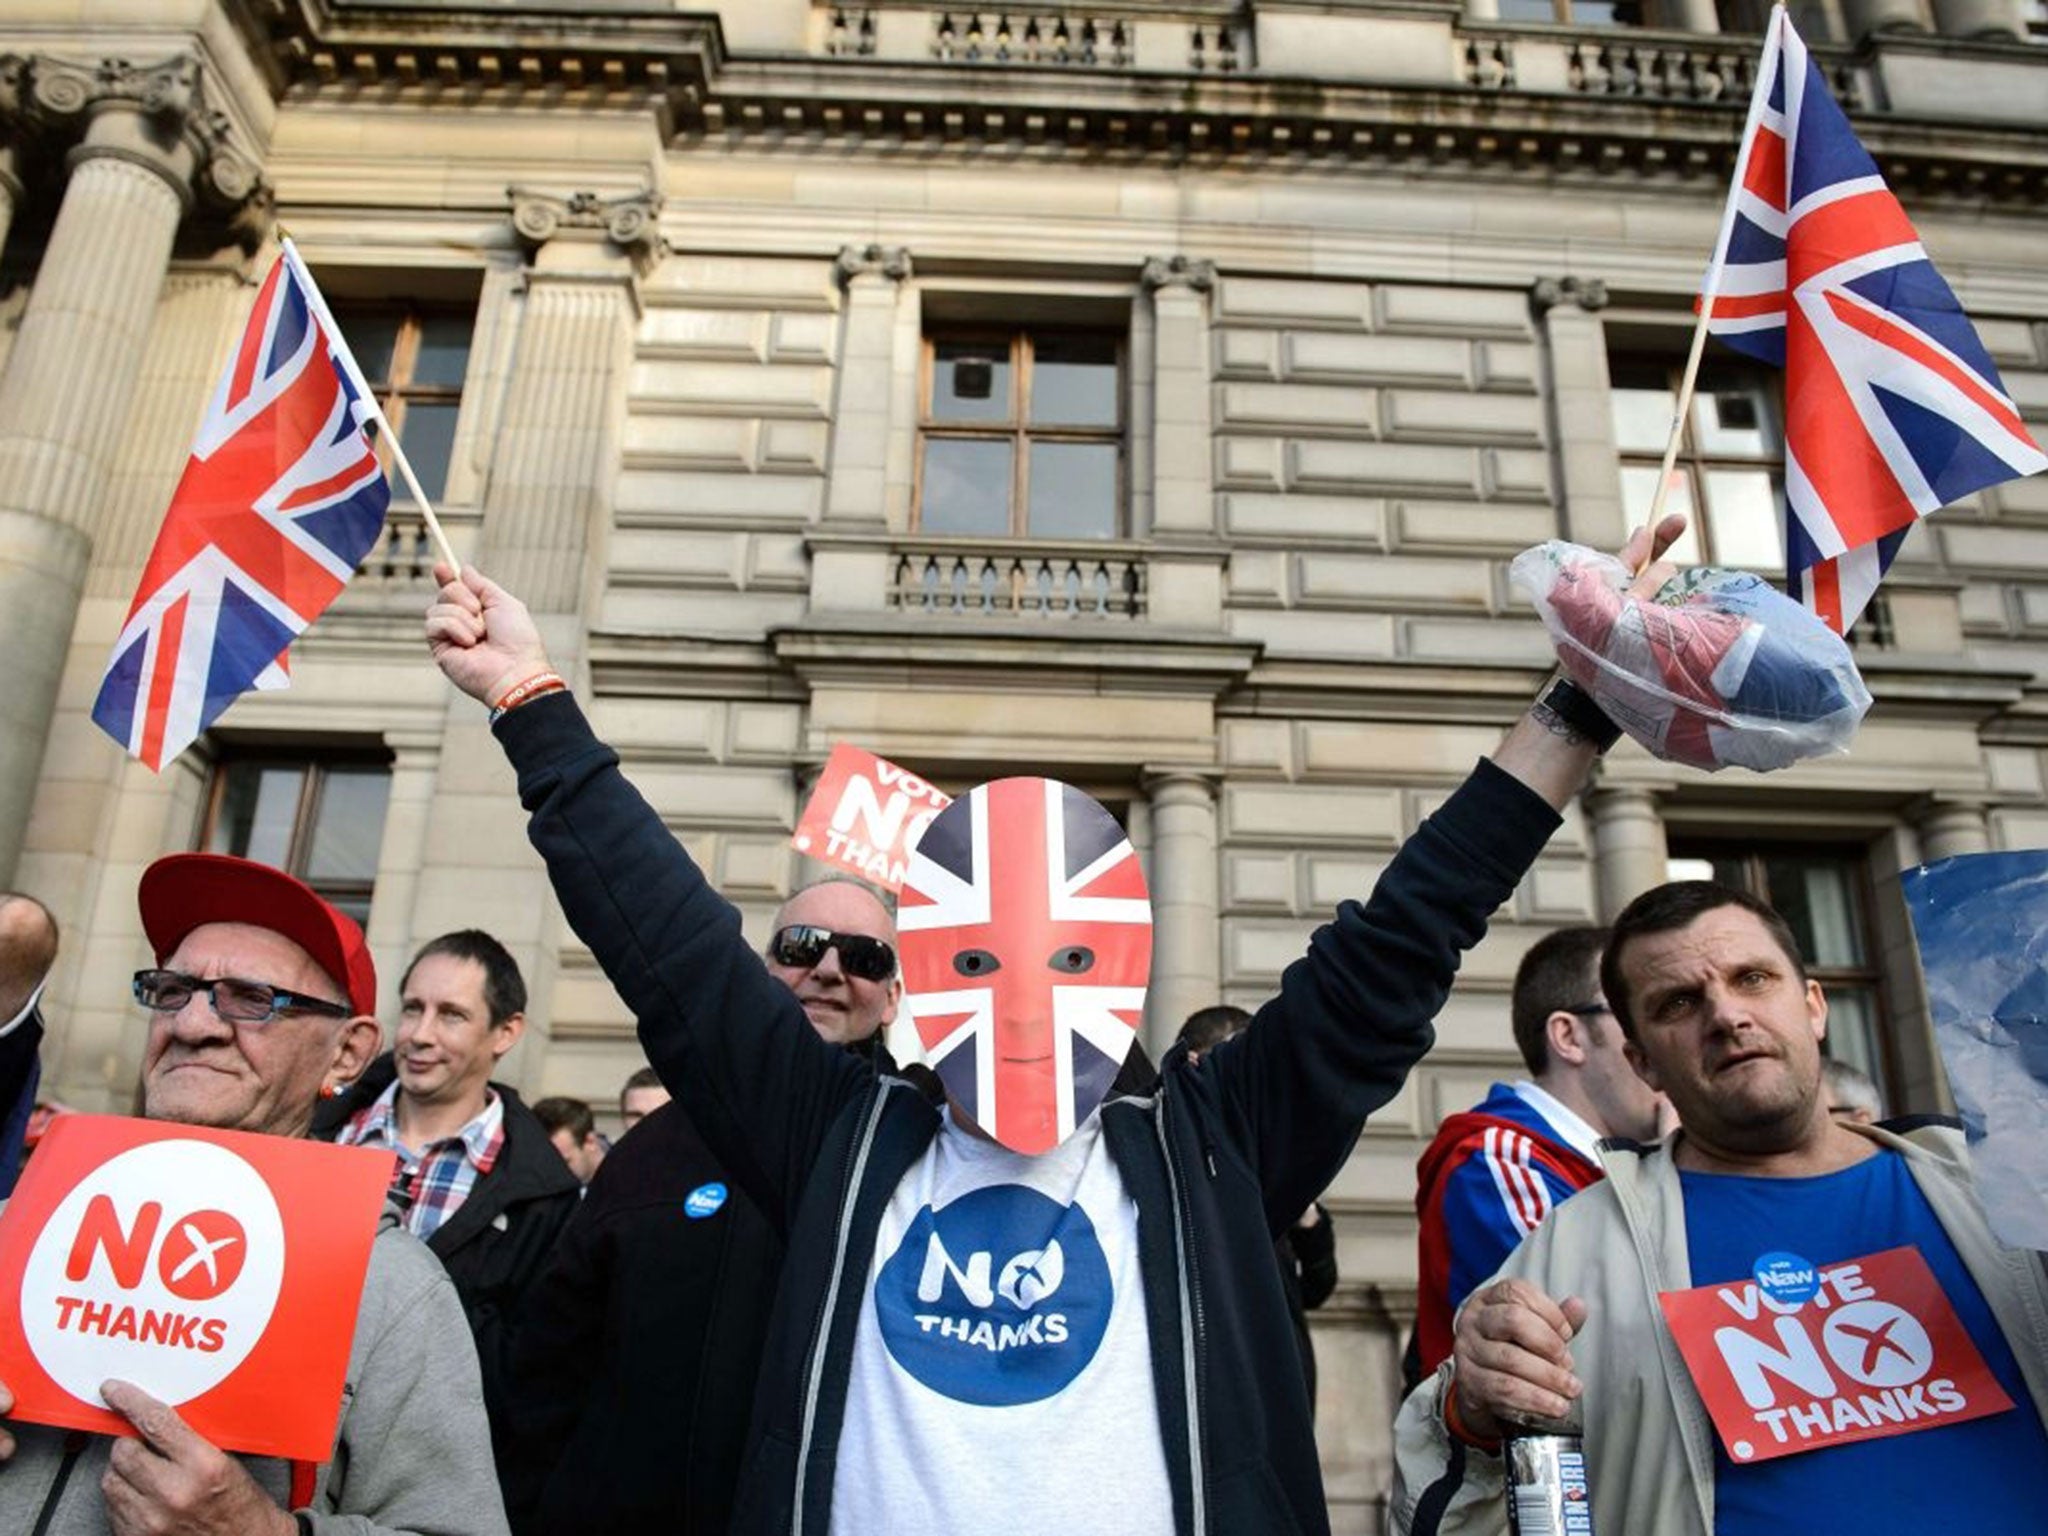 Pro-union activists rally opposite of pro-independence supporters in Glasgow's George Square, in Scotland